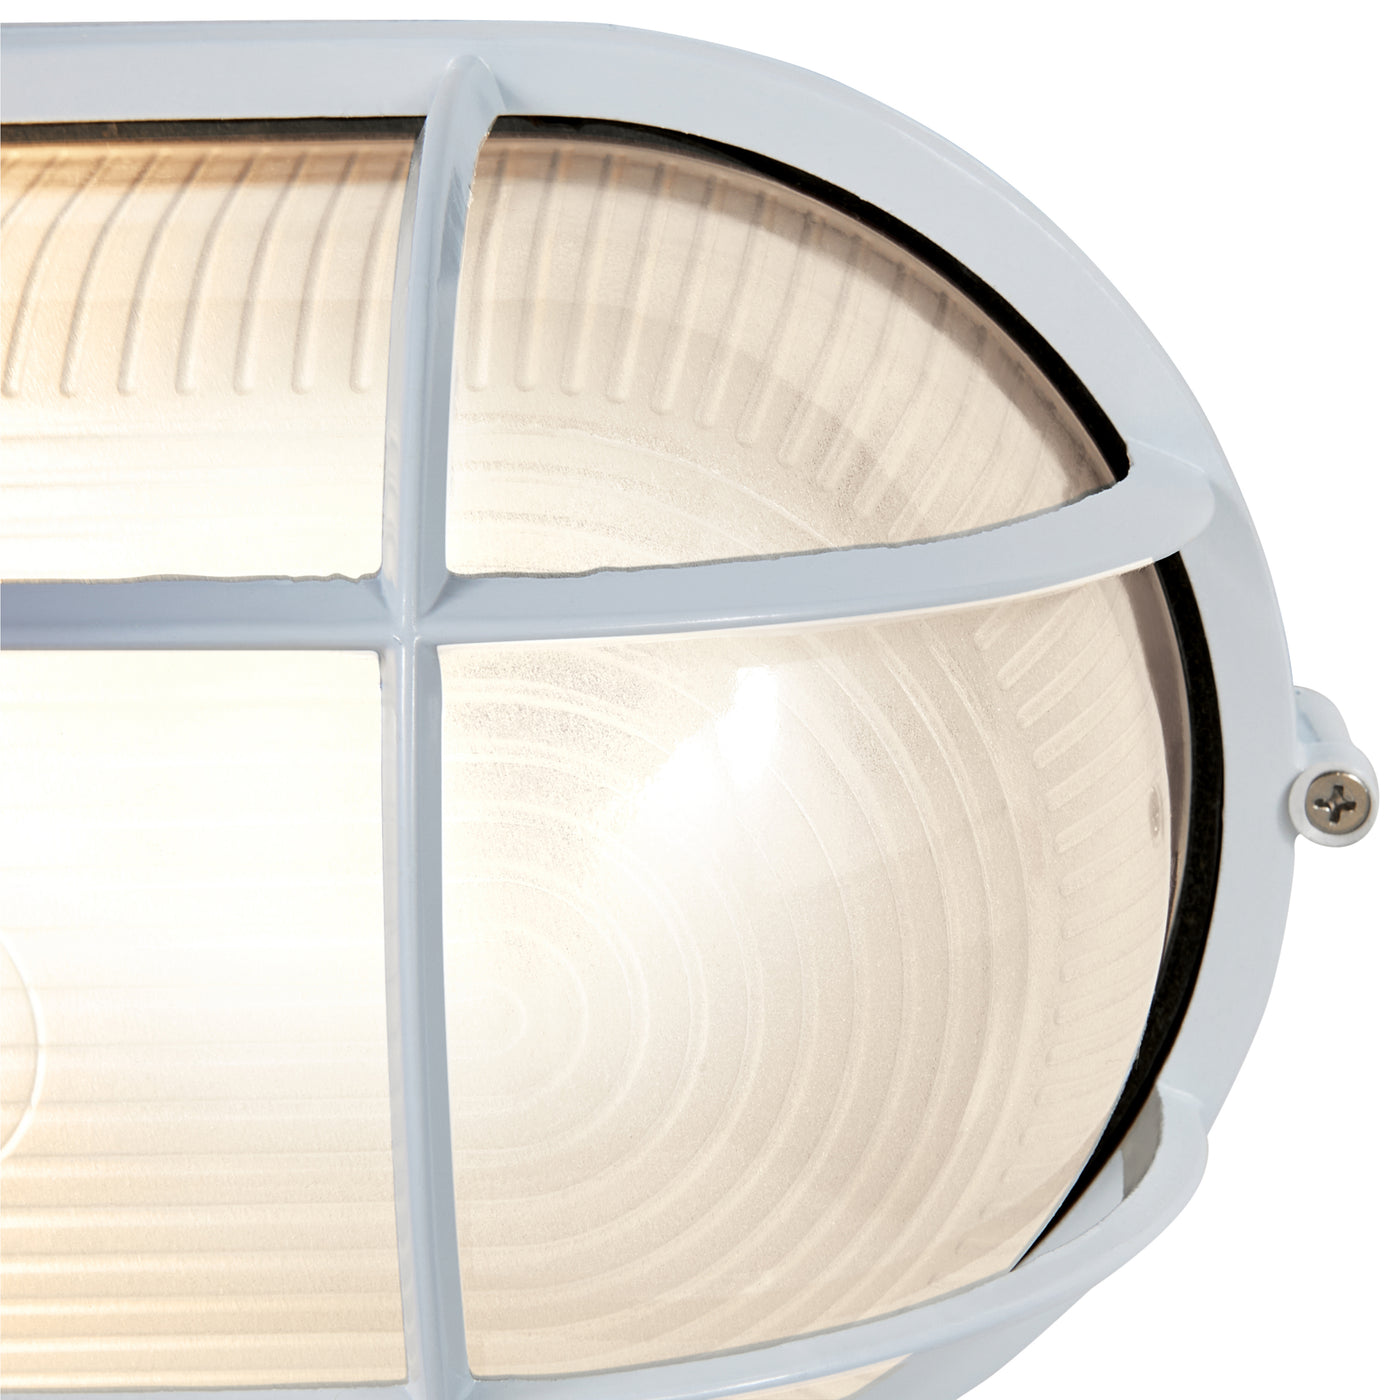 1 Light Outdoor Bulkhead, 100W, 120V, White Finish, Nauticus Dual Mount Collection